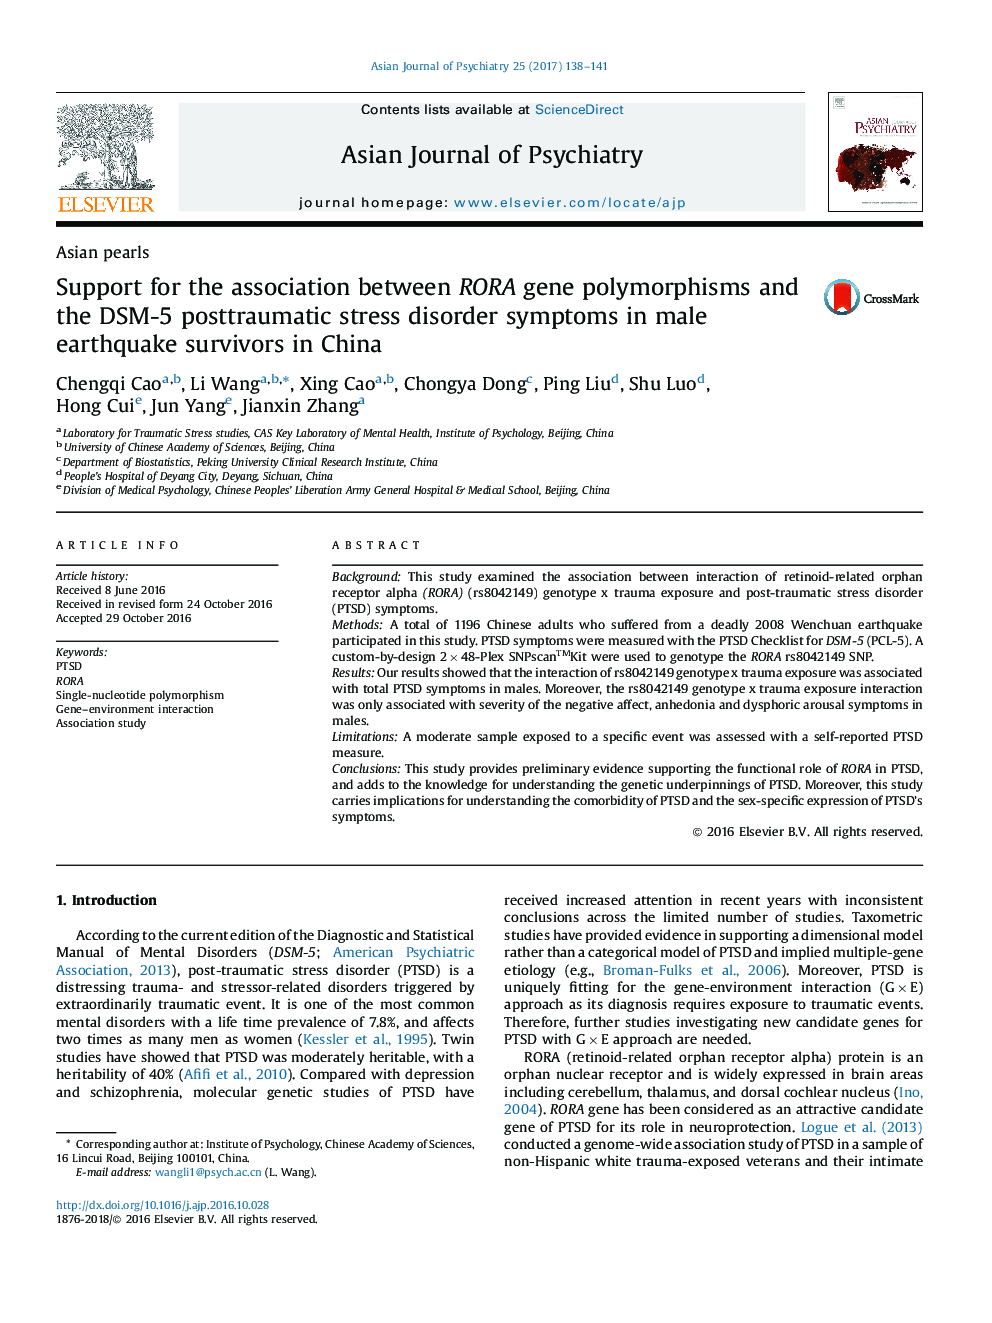 Support for the association between RORA gene polymorphisms and the DSM-5 posttraumatic stress disorder symptoms in male earthquake survivors in China